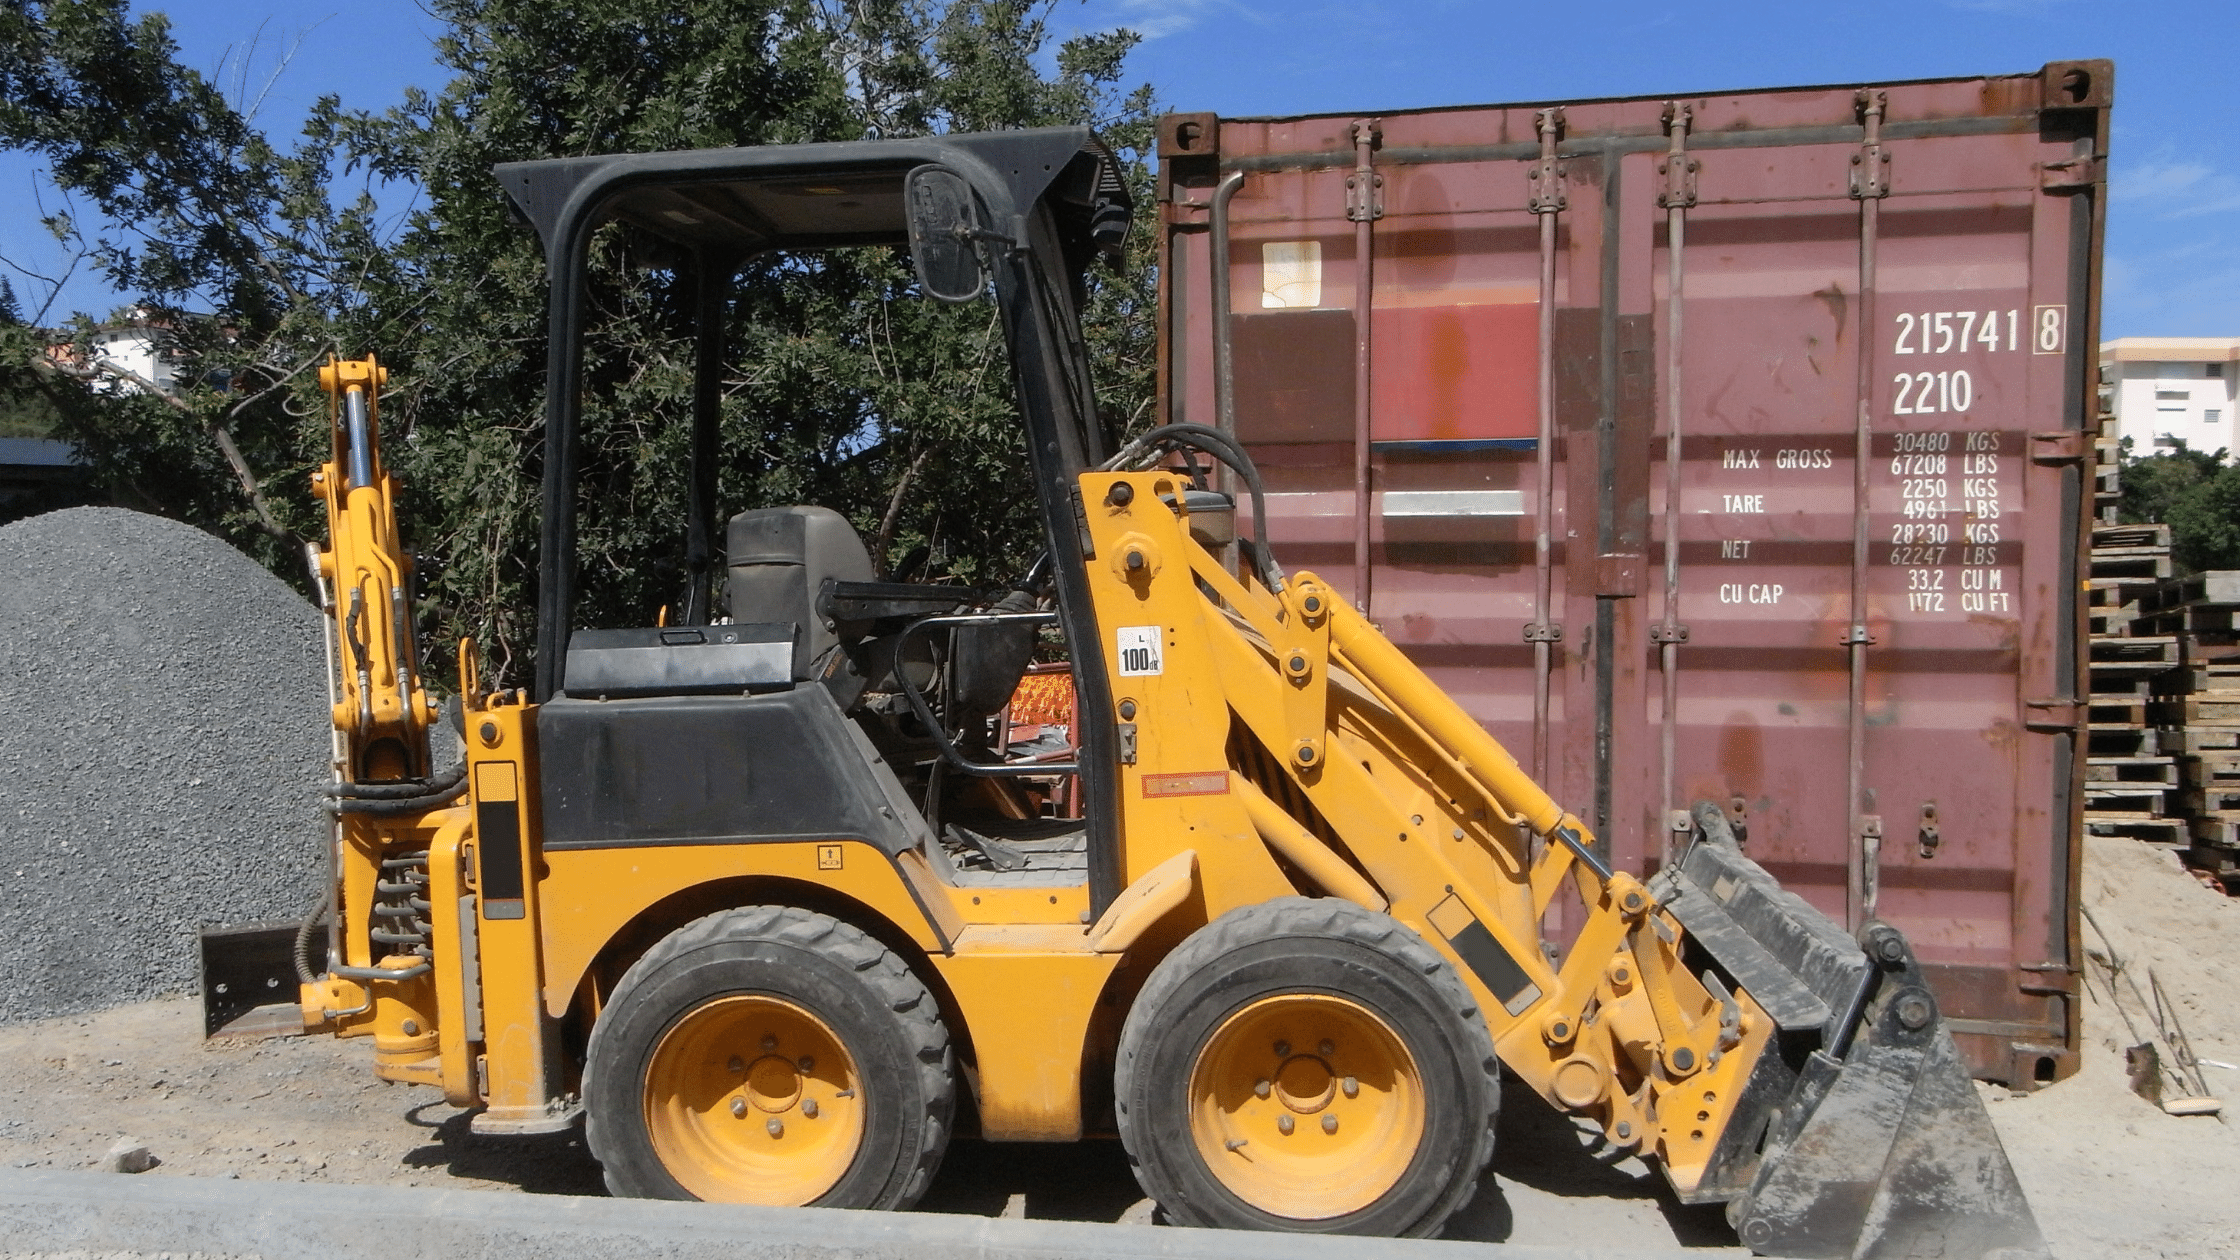 heavy equipment being used on worksite